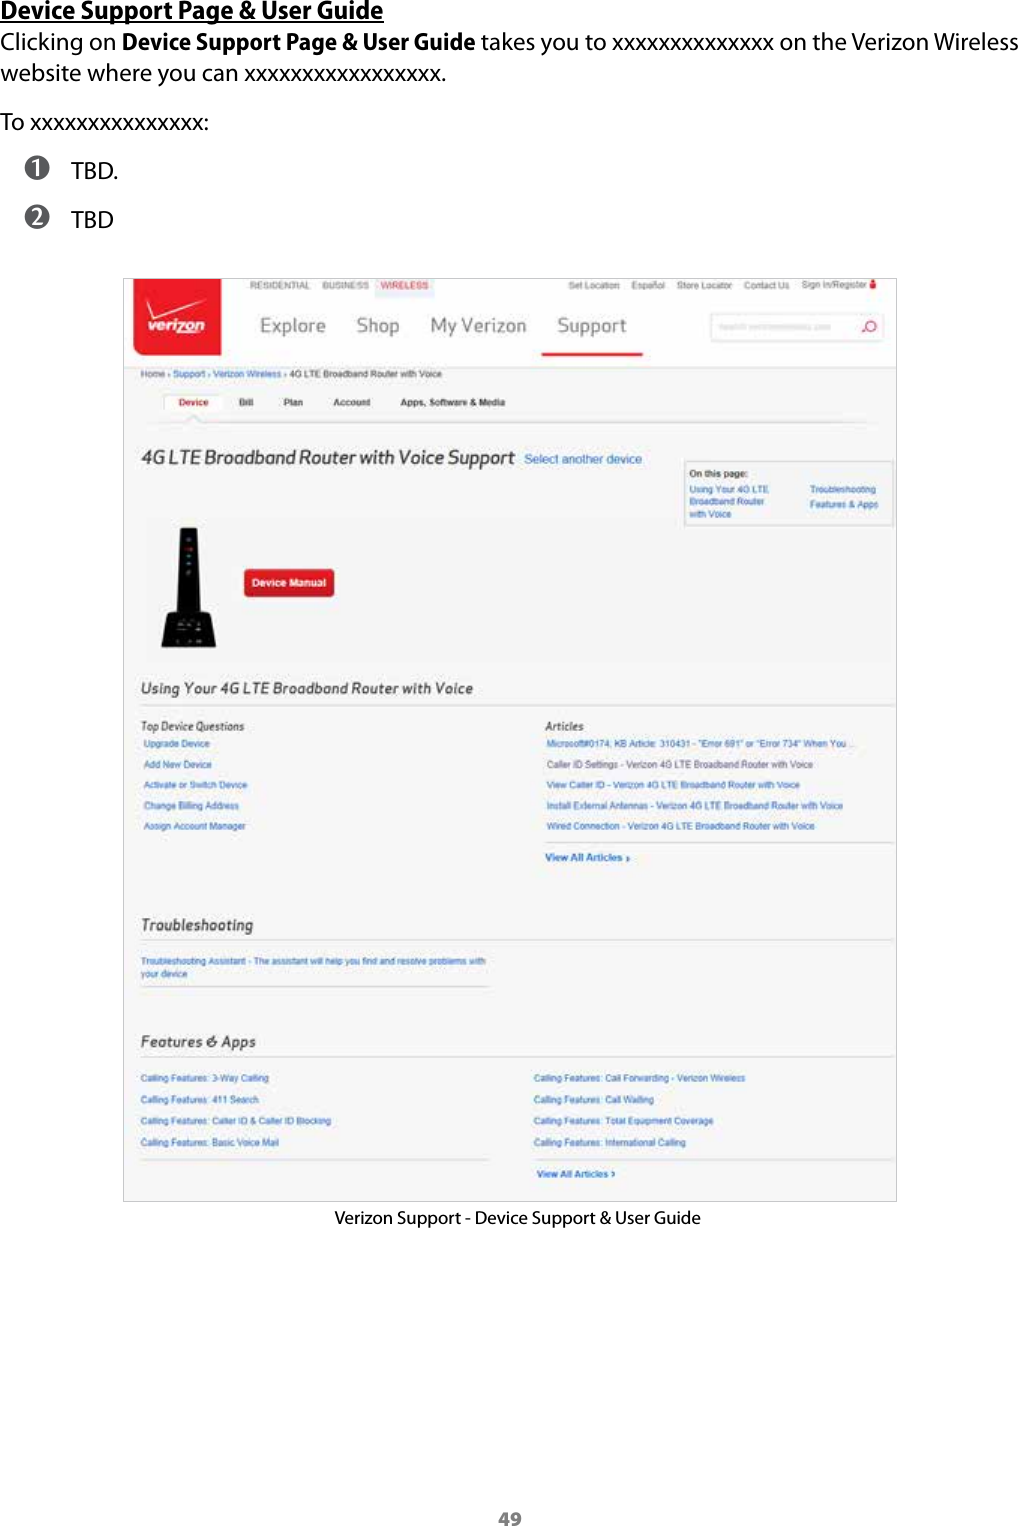 49Device Support Page &amp; User GuideClicking on Device Support Page &amp; User Guide takes you to xxxxxxxxxxxxxx on the Verizon Wireless website where you can xxxxxxxxxxxxxxxxx. To xxxxxxxxxxxxxxx: ➊ TBD. ➋ TBDVerizon Support - Device Support &amp; User Guide